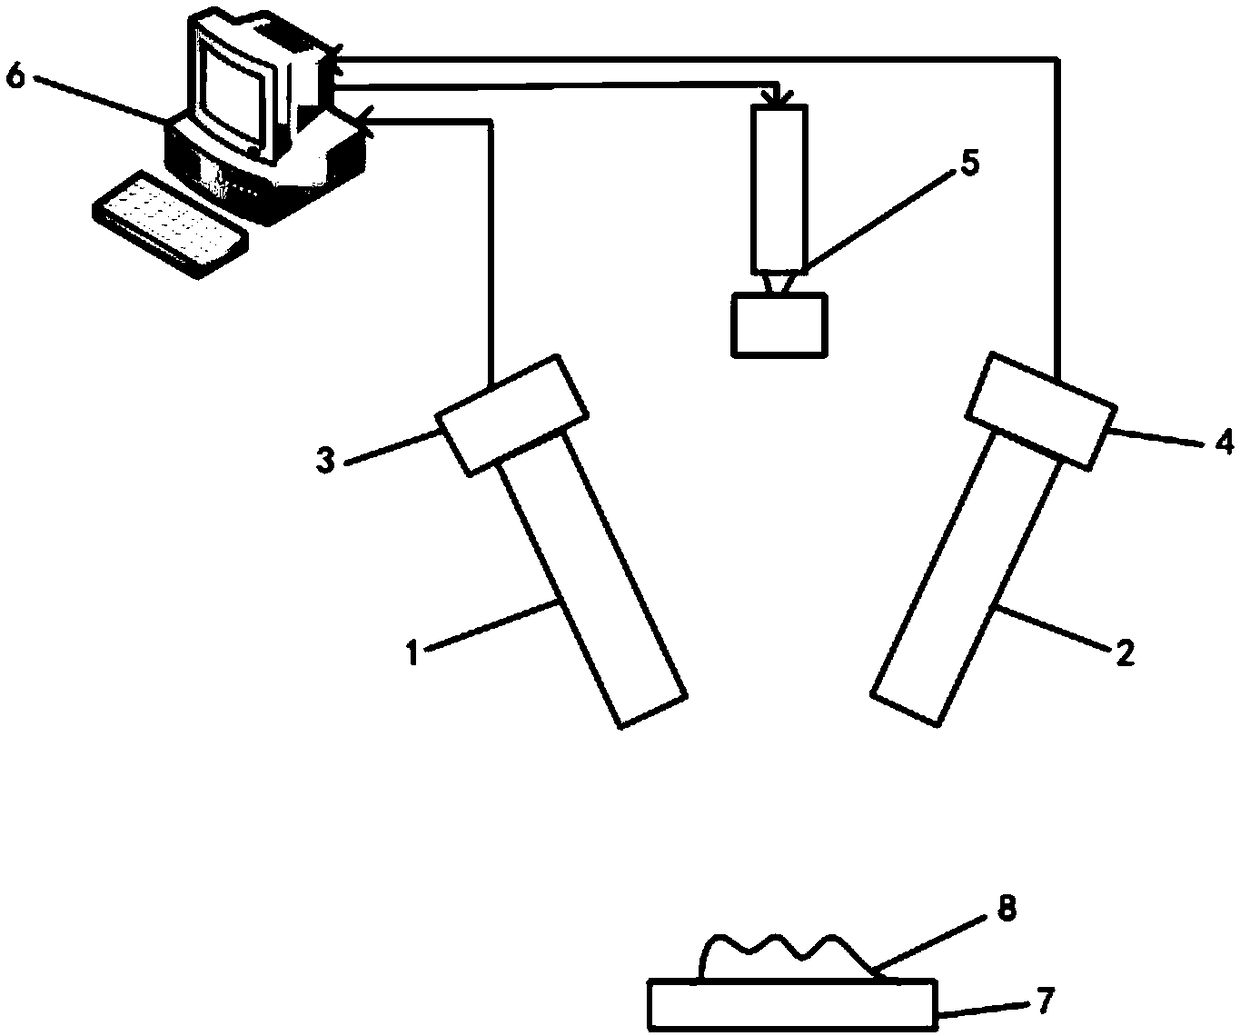 A Telecentric Microscopic Binocular Stereo Vision Measurement Method Based on Digital Speckle